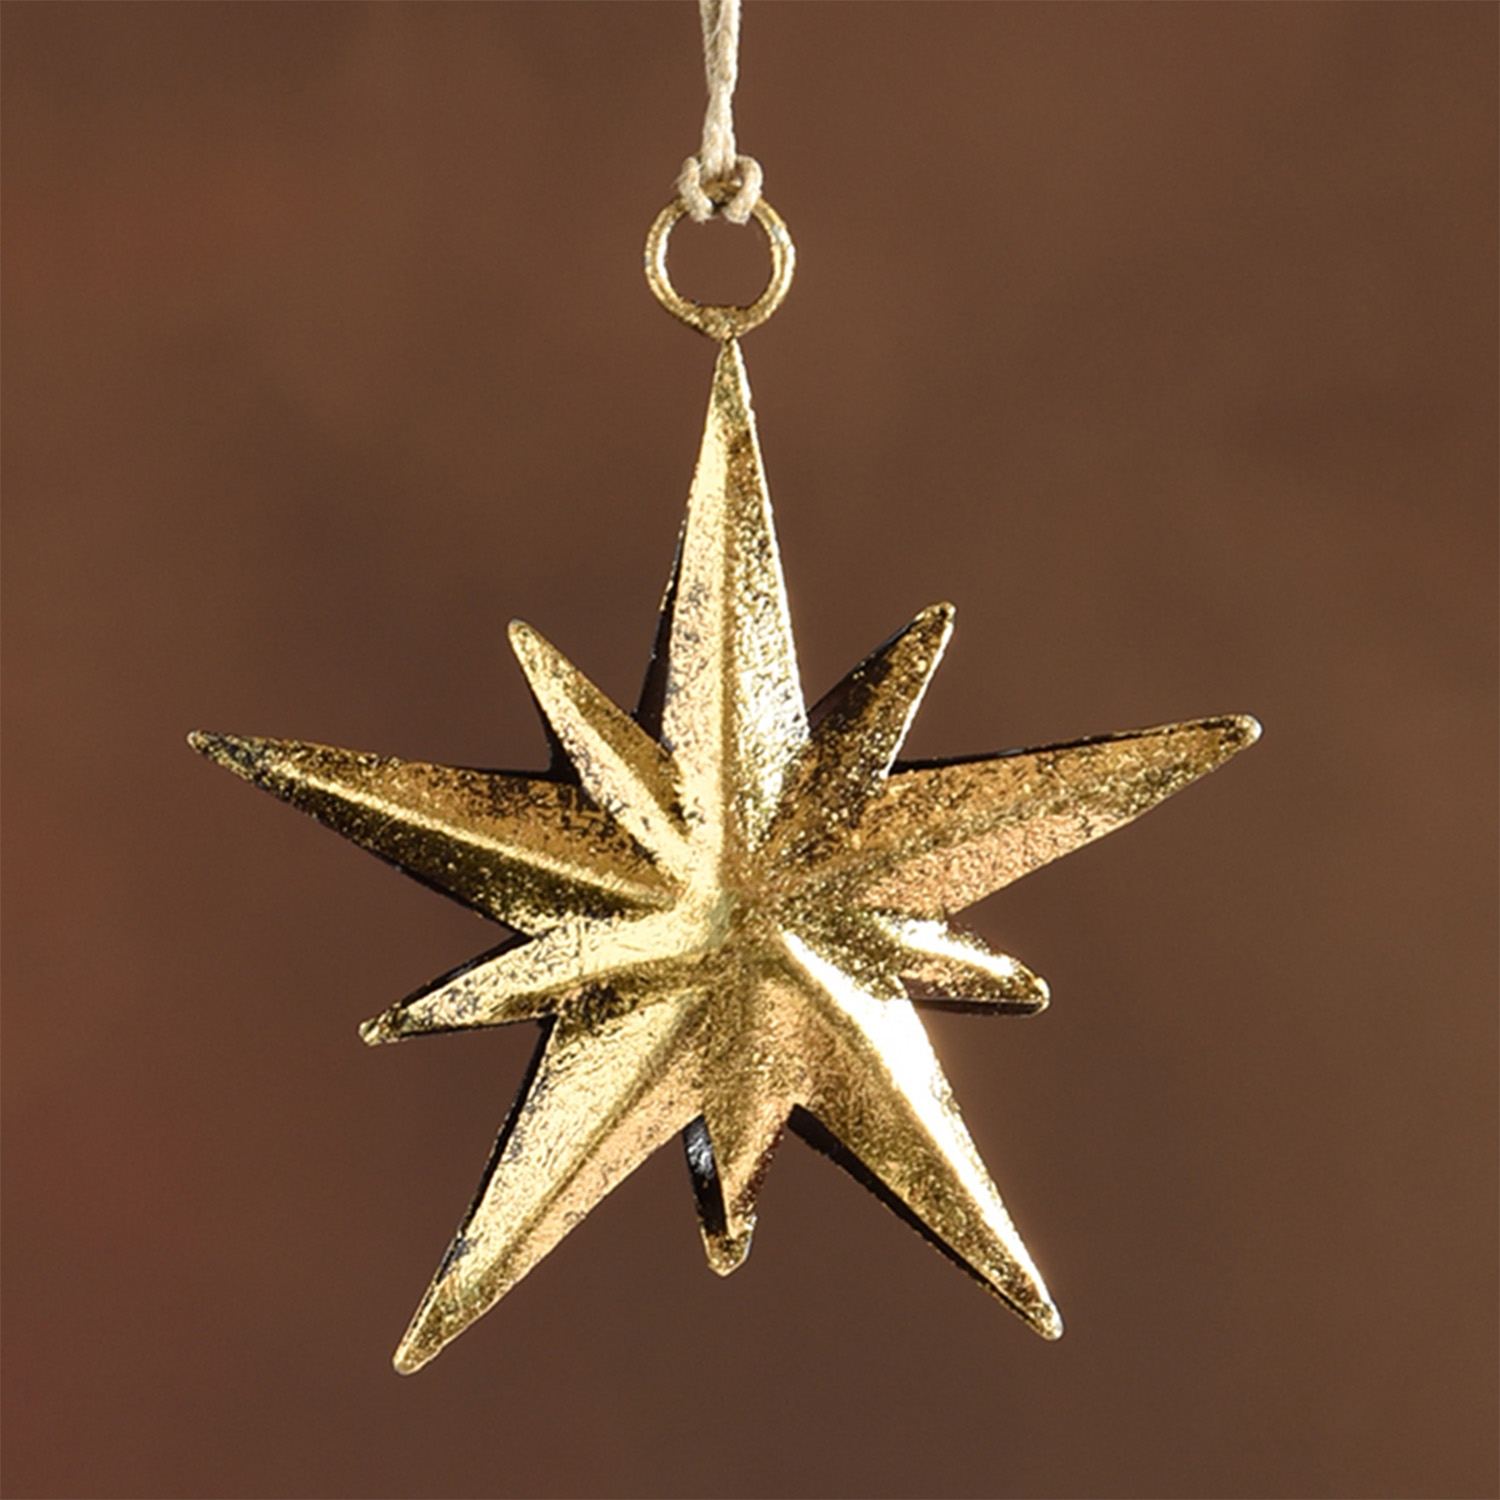 Small Northern Star Metal Ornament Set of 4 by HomArt - Seven Colonial